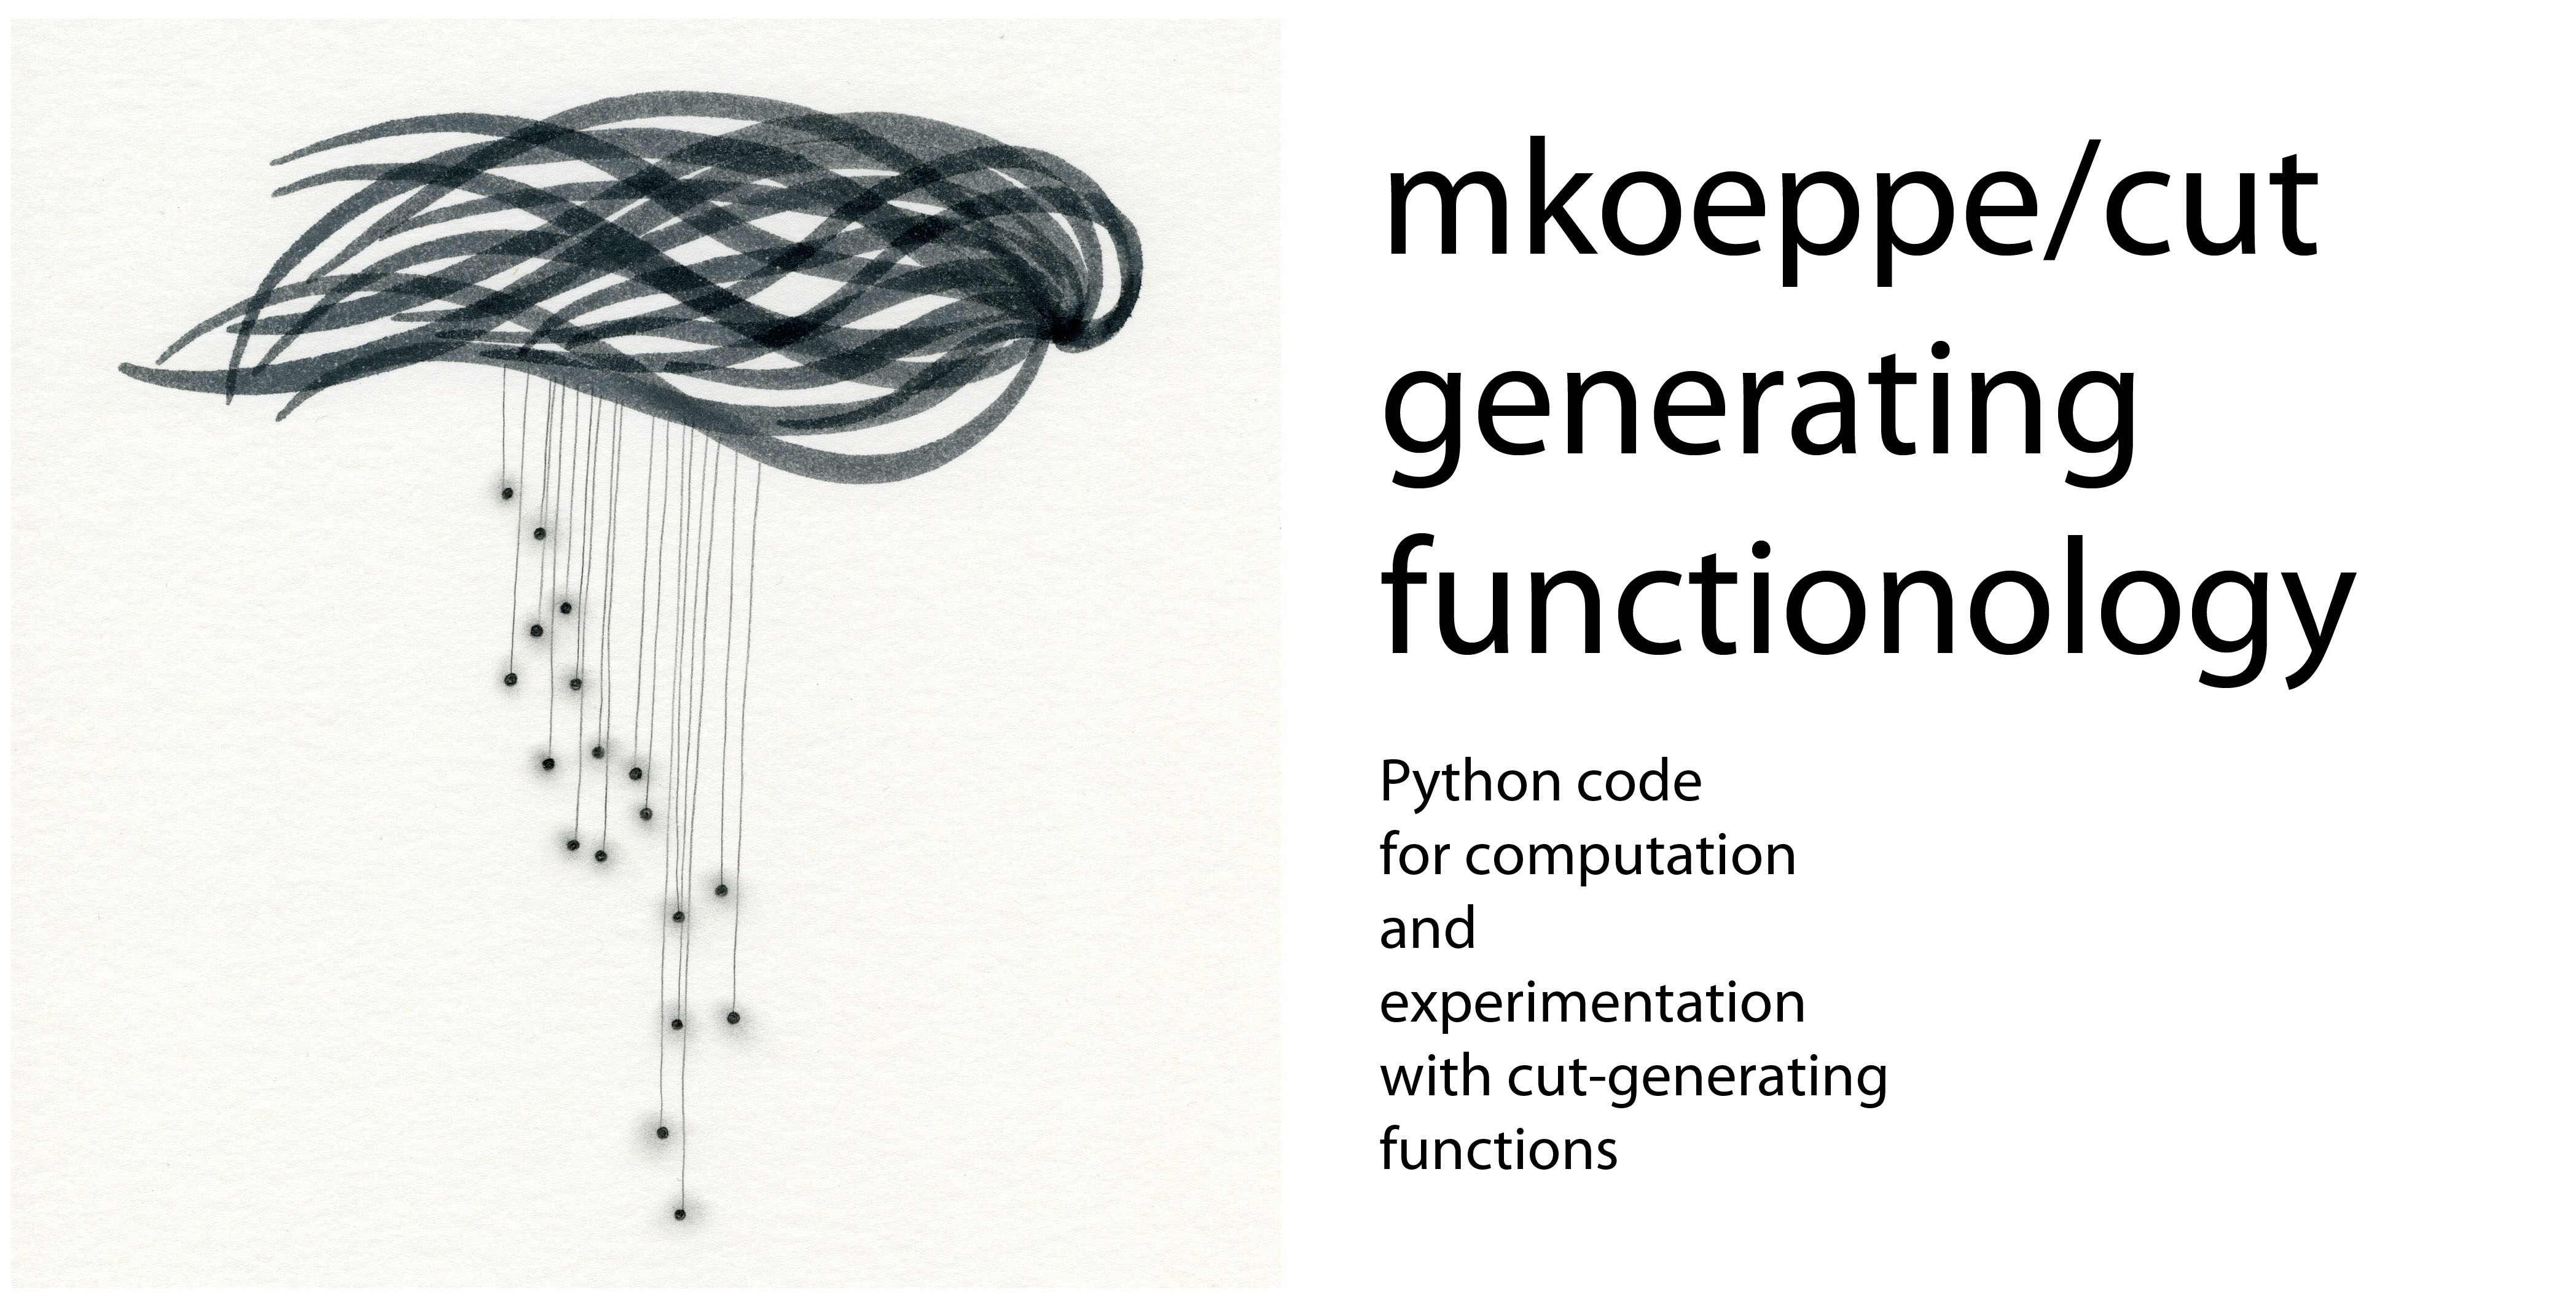 mkoeppe/cutgeneratingfunctionology: Python code for computation and experimentation with cut-generating functions